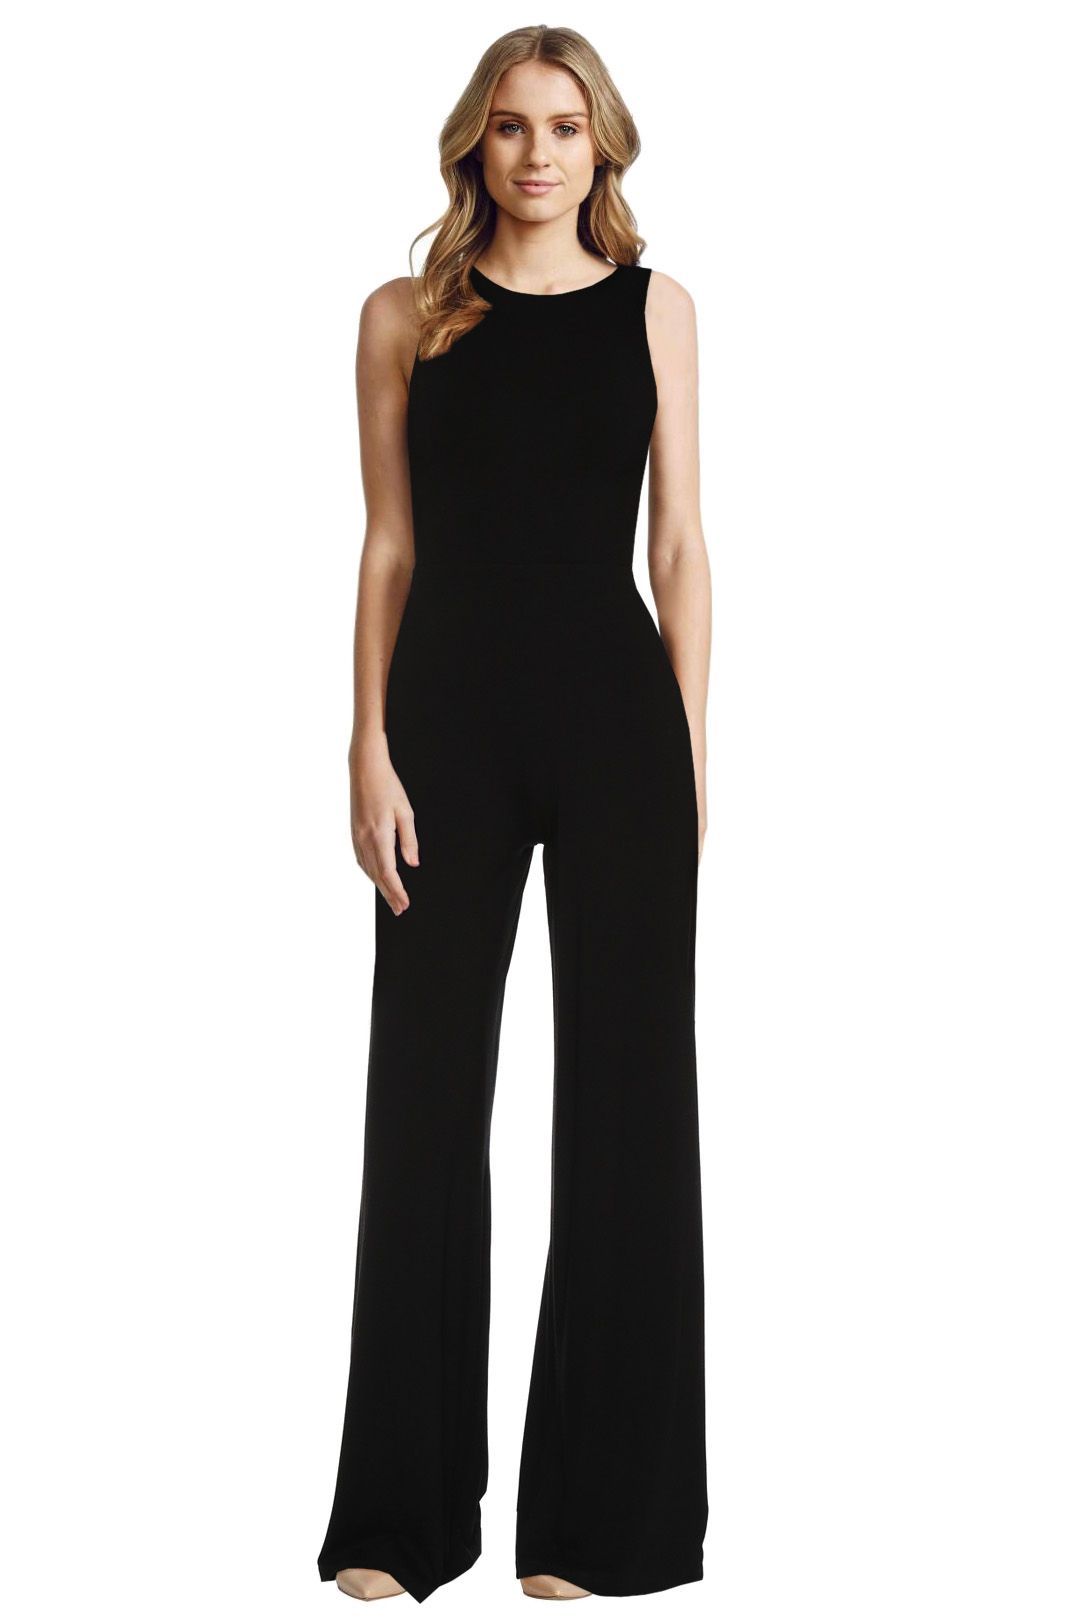 Alice and Olivia - Judee Racer Back Jumpsuit - Front